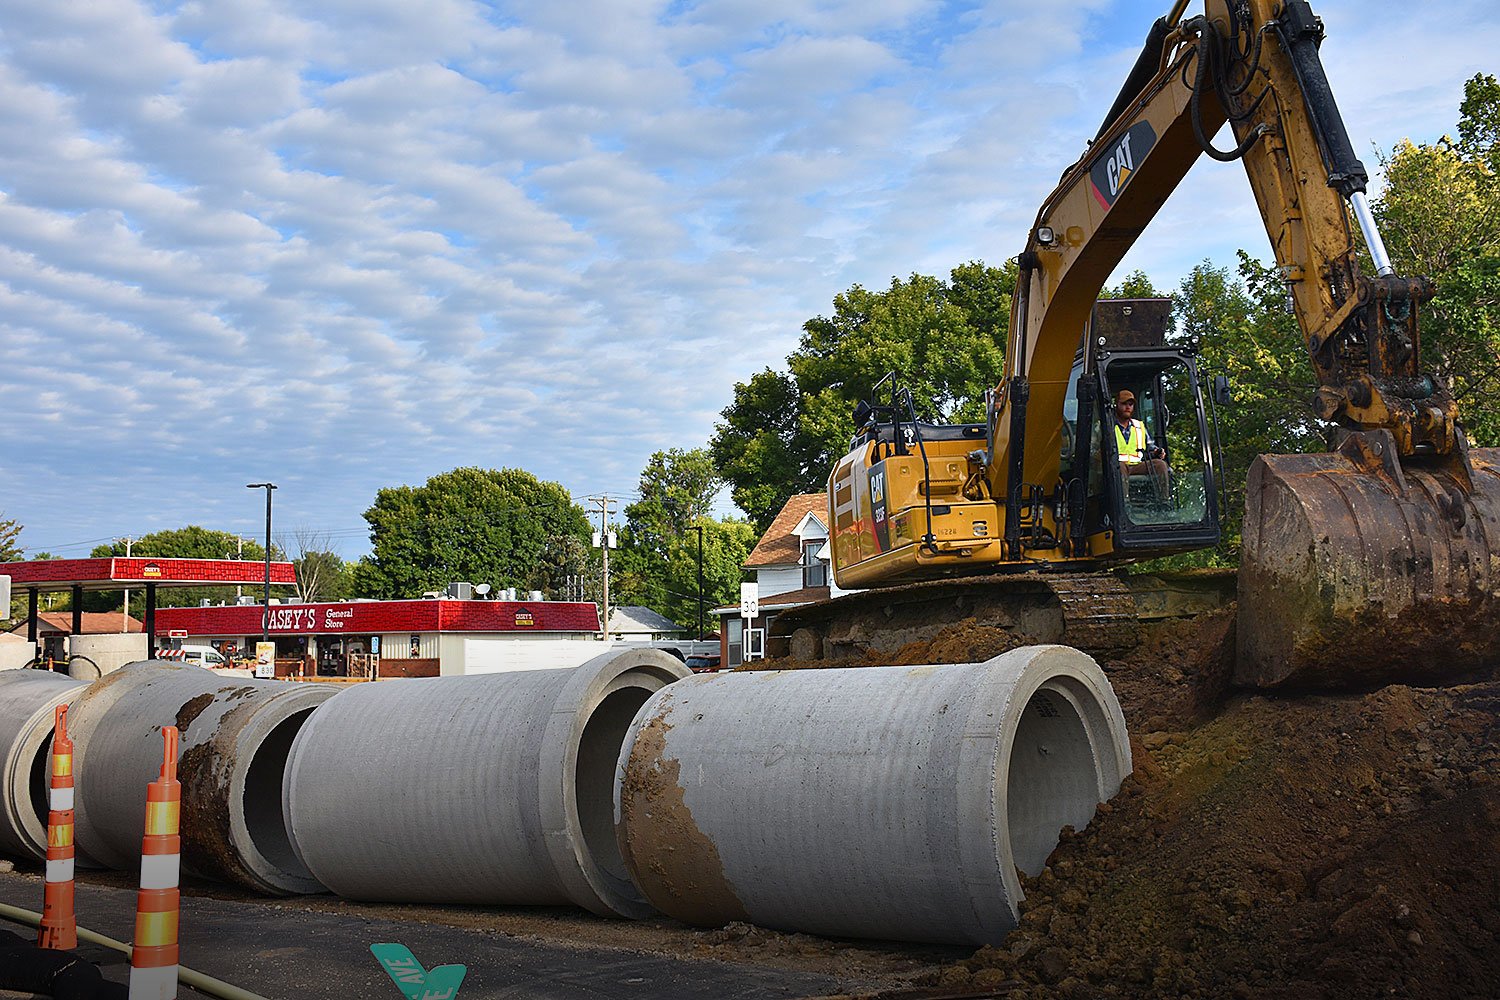 Sections of Main Sewer Line